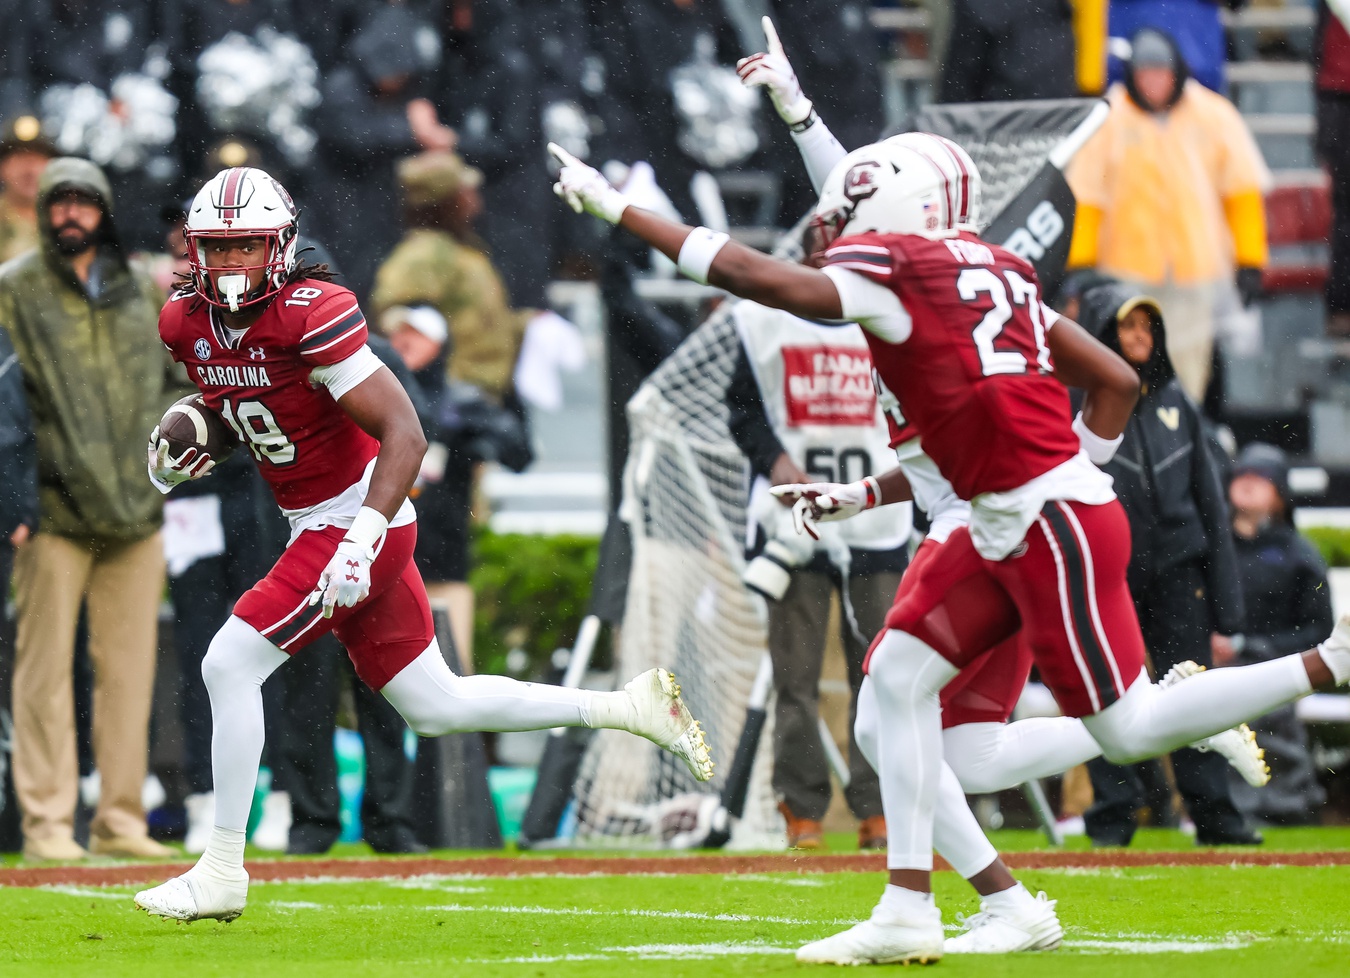 South Carolina started slow but finished well on Saturday. Big plays in all three phases helped the Gamecocks messy day end in a win.